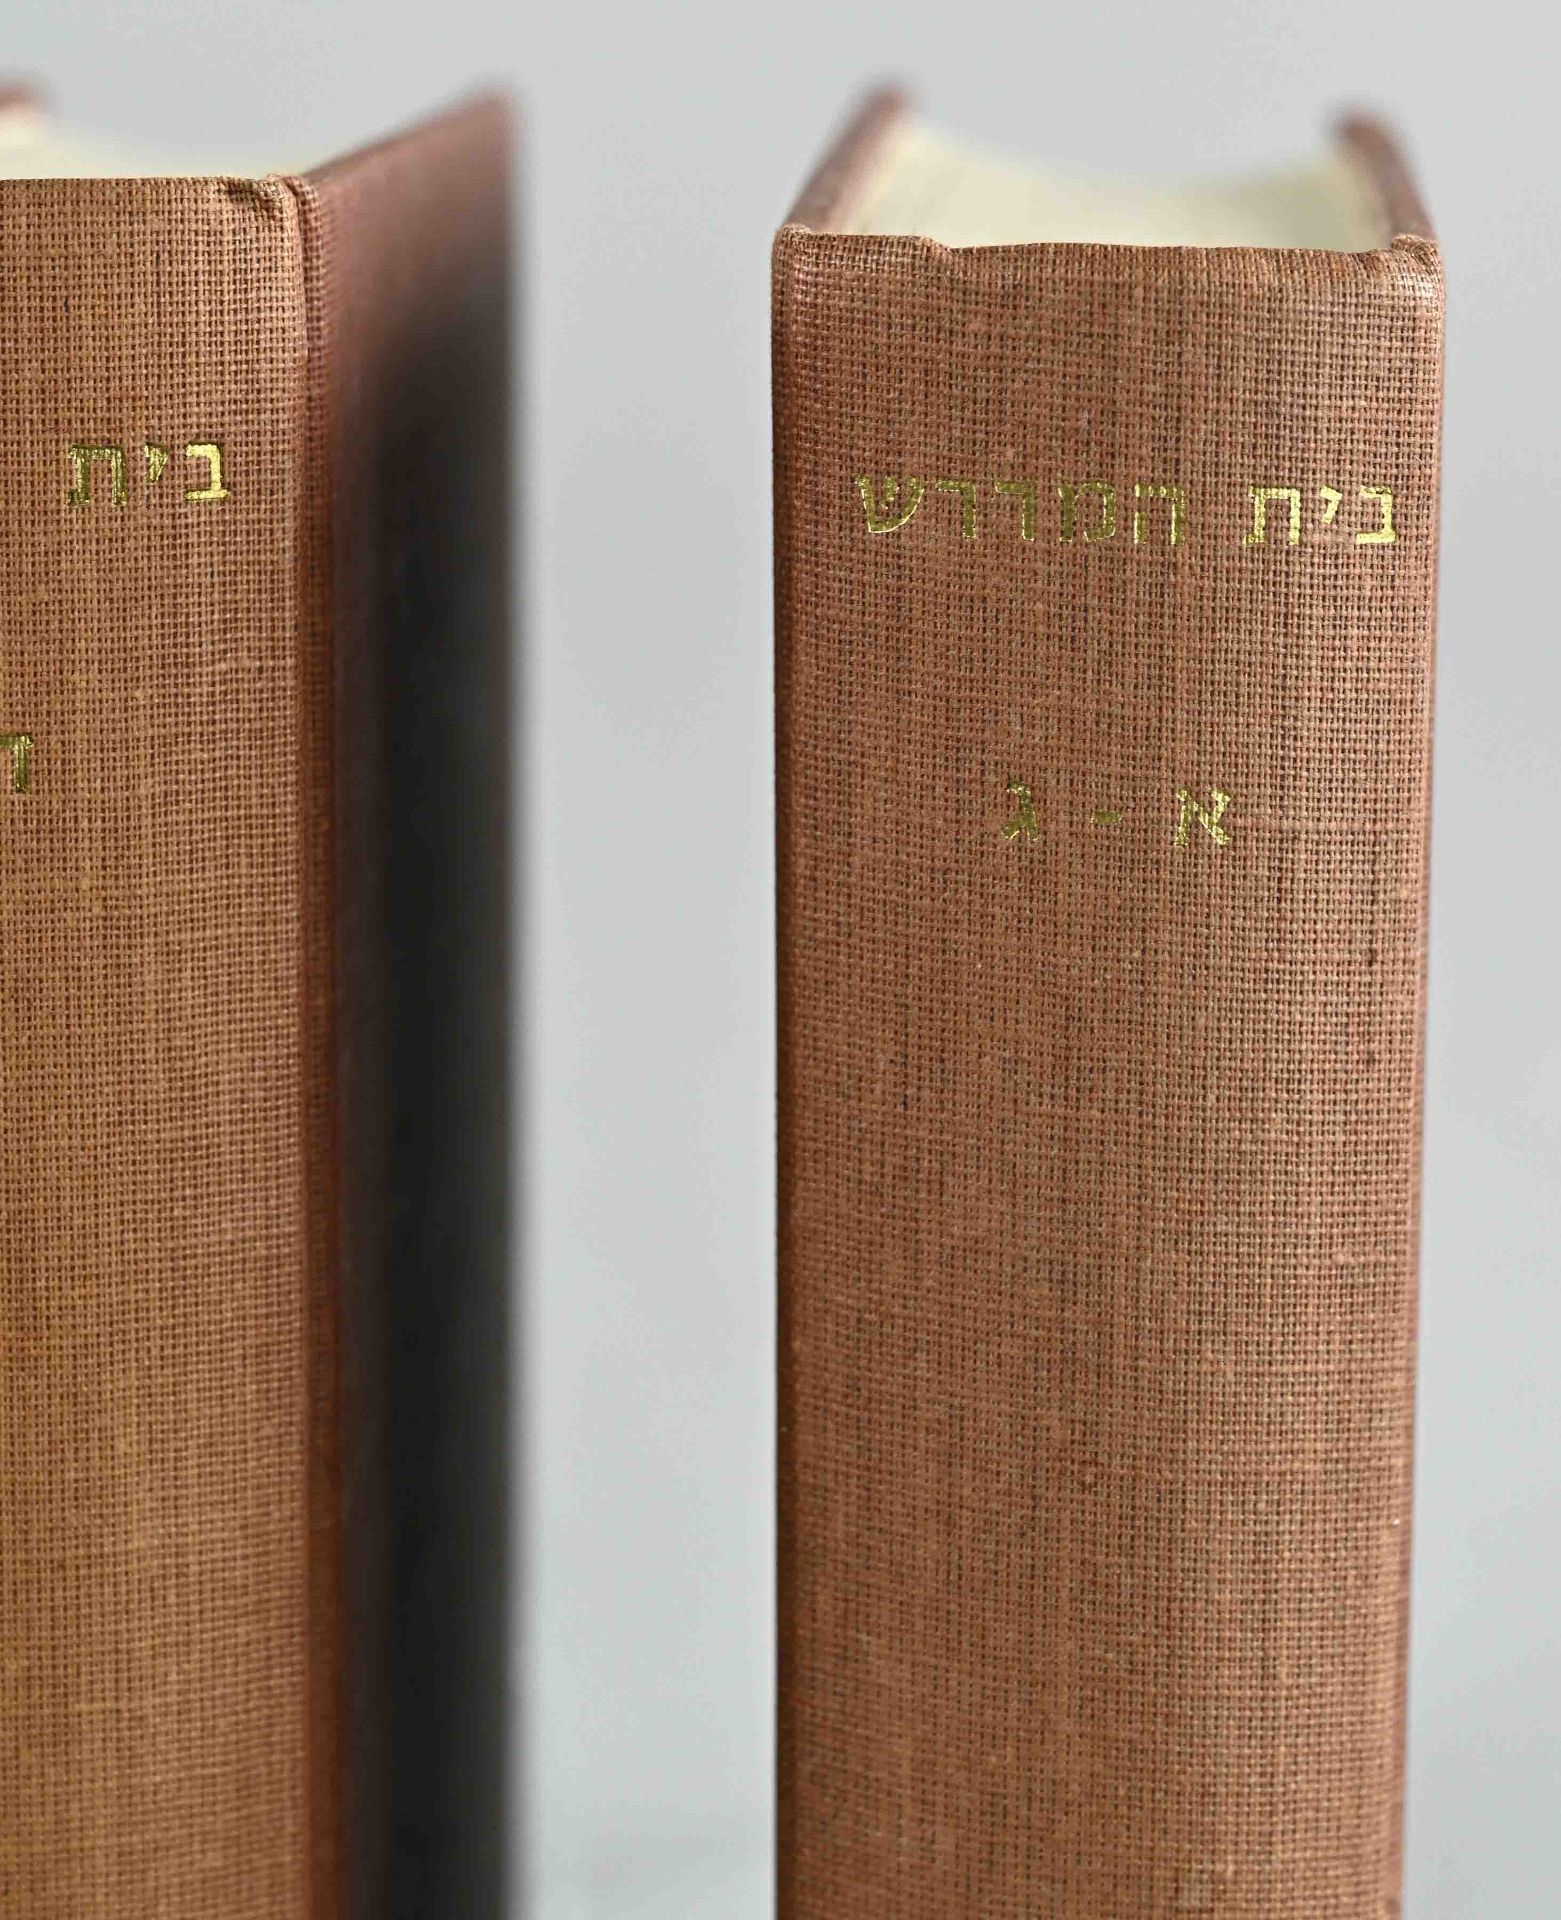 Judaica - Book, Bet ha Midrash. Collection of small midrashin and miscellaneous treatises from anci - Image 3 of 5